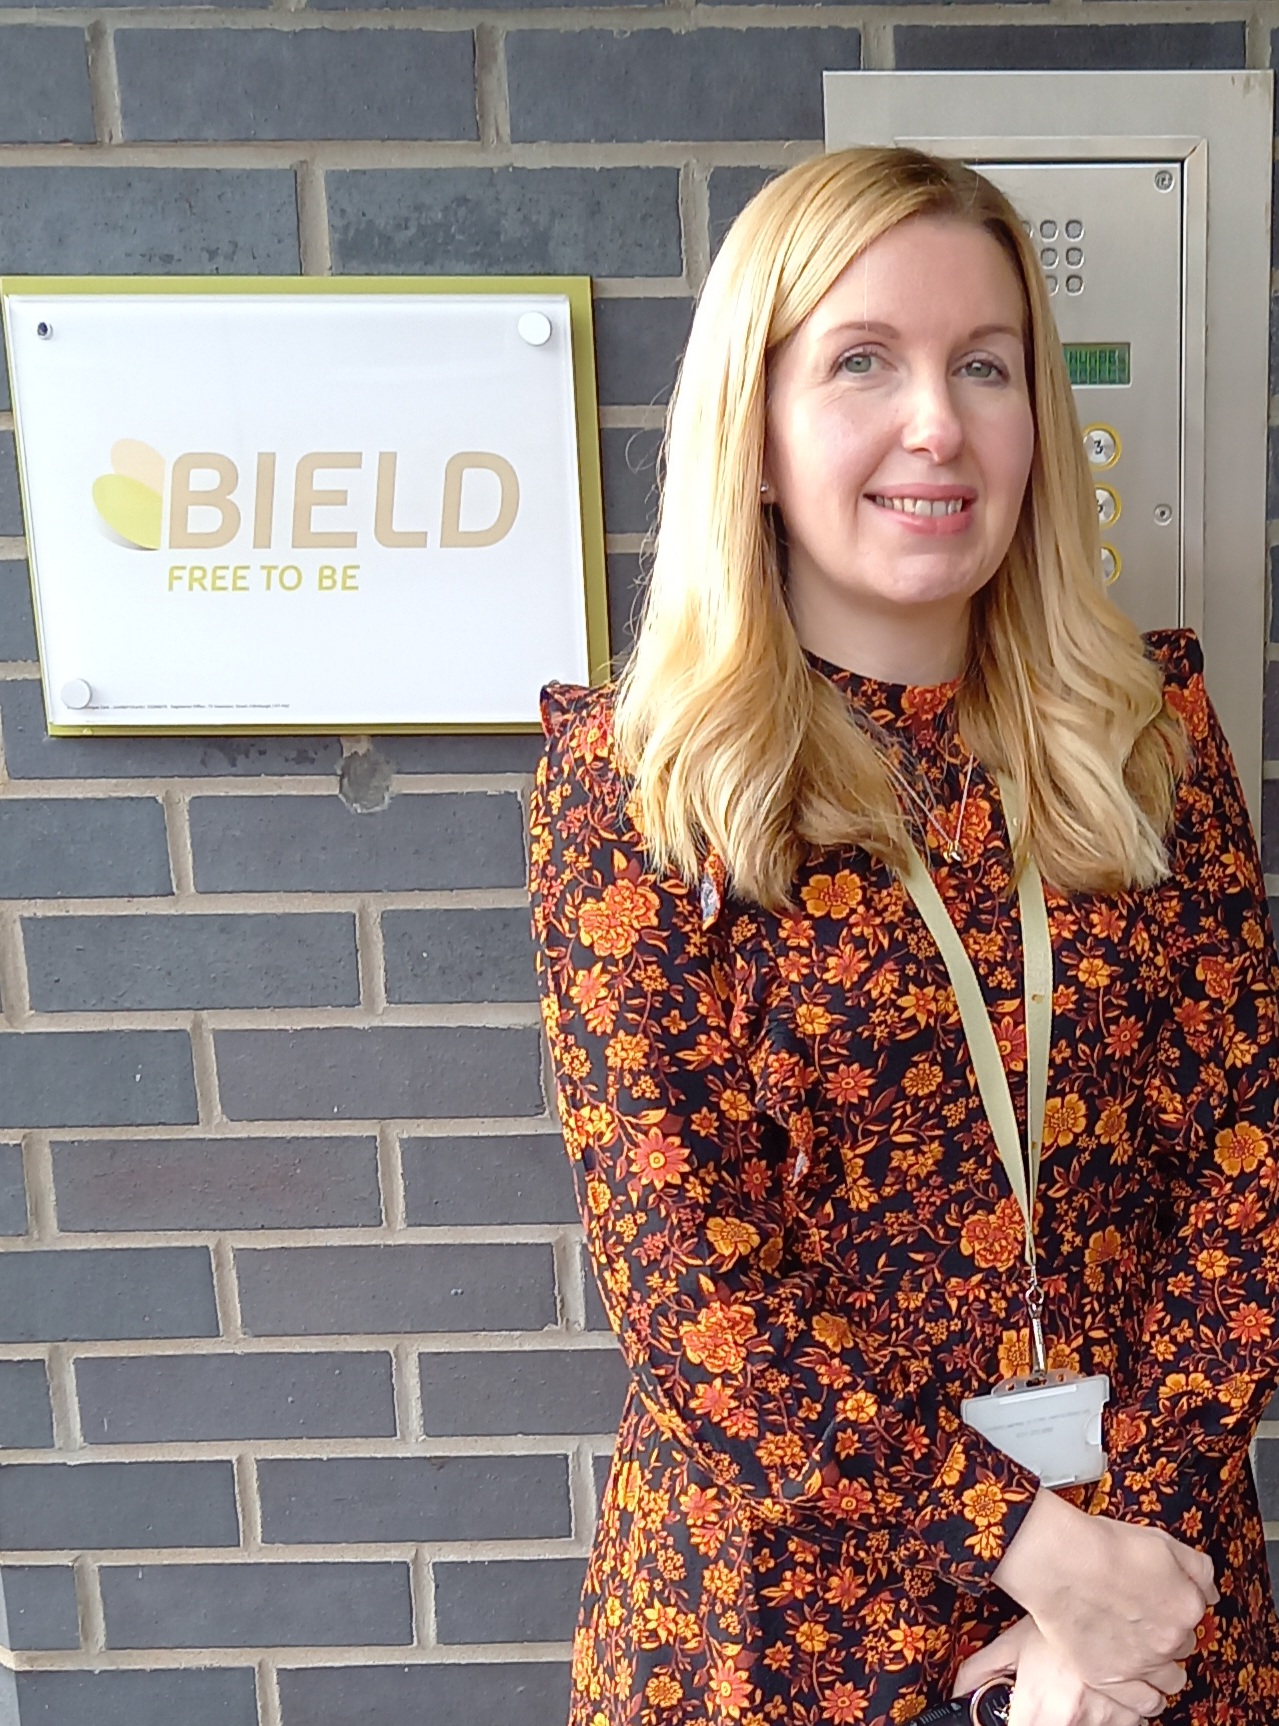 Bield retirement development manager shares secret to ten years of service to community